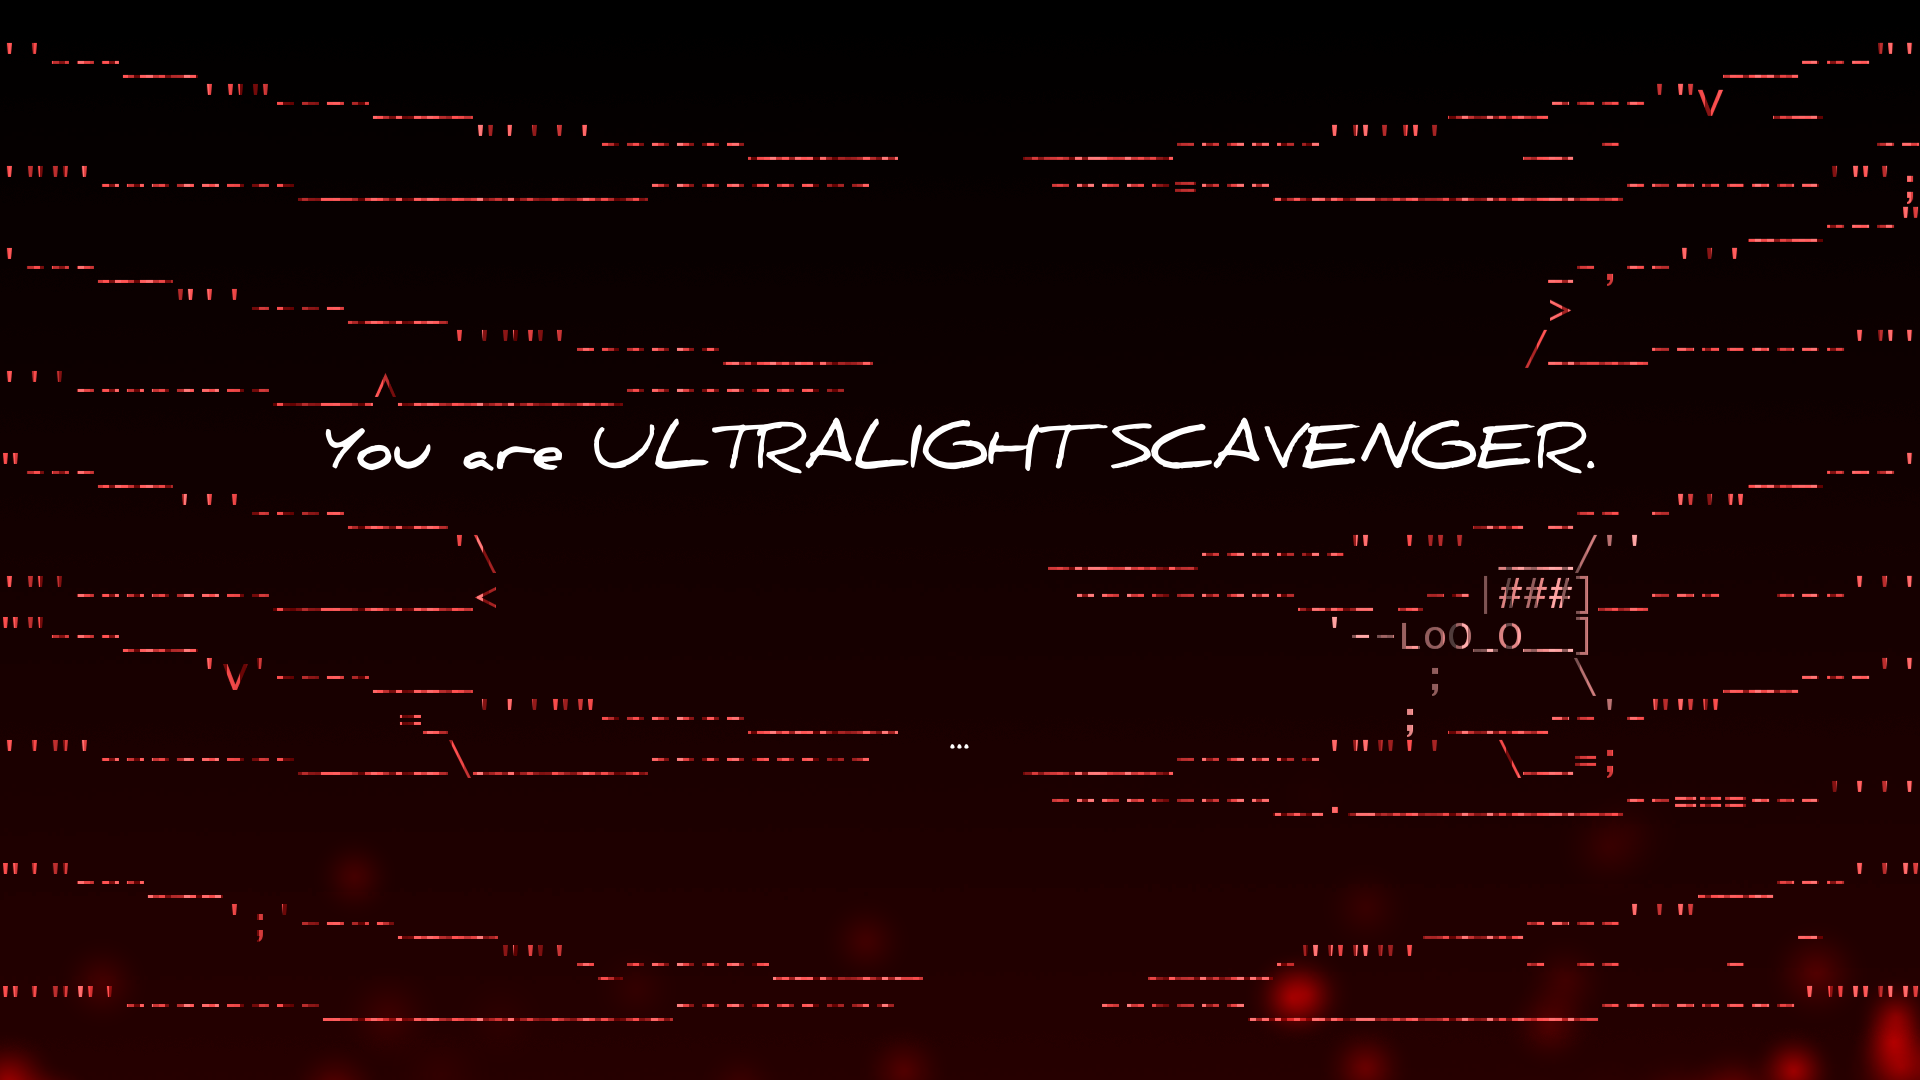 This screen is what it looks like when you are getting into the ribcage of your meat-mech in Extreme Meatpunks Forever. In text, the screen says, "You are ULTRALIGHT SCAVENGER."